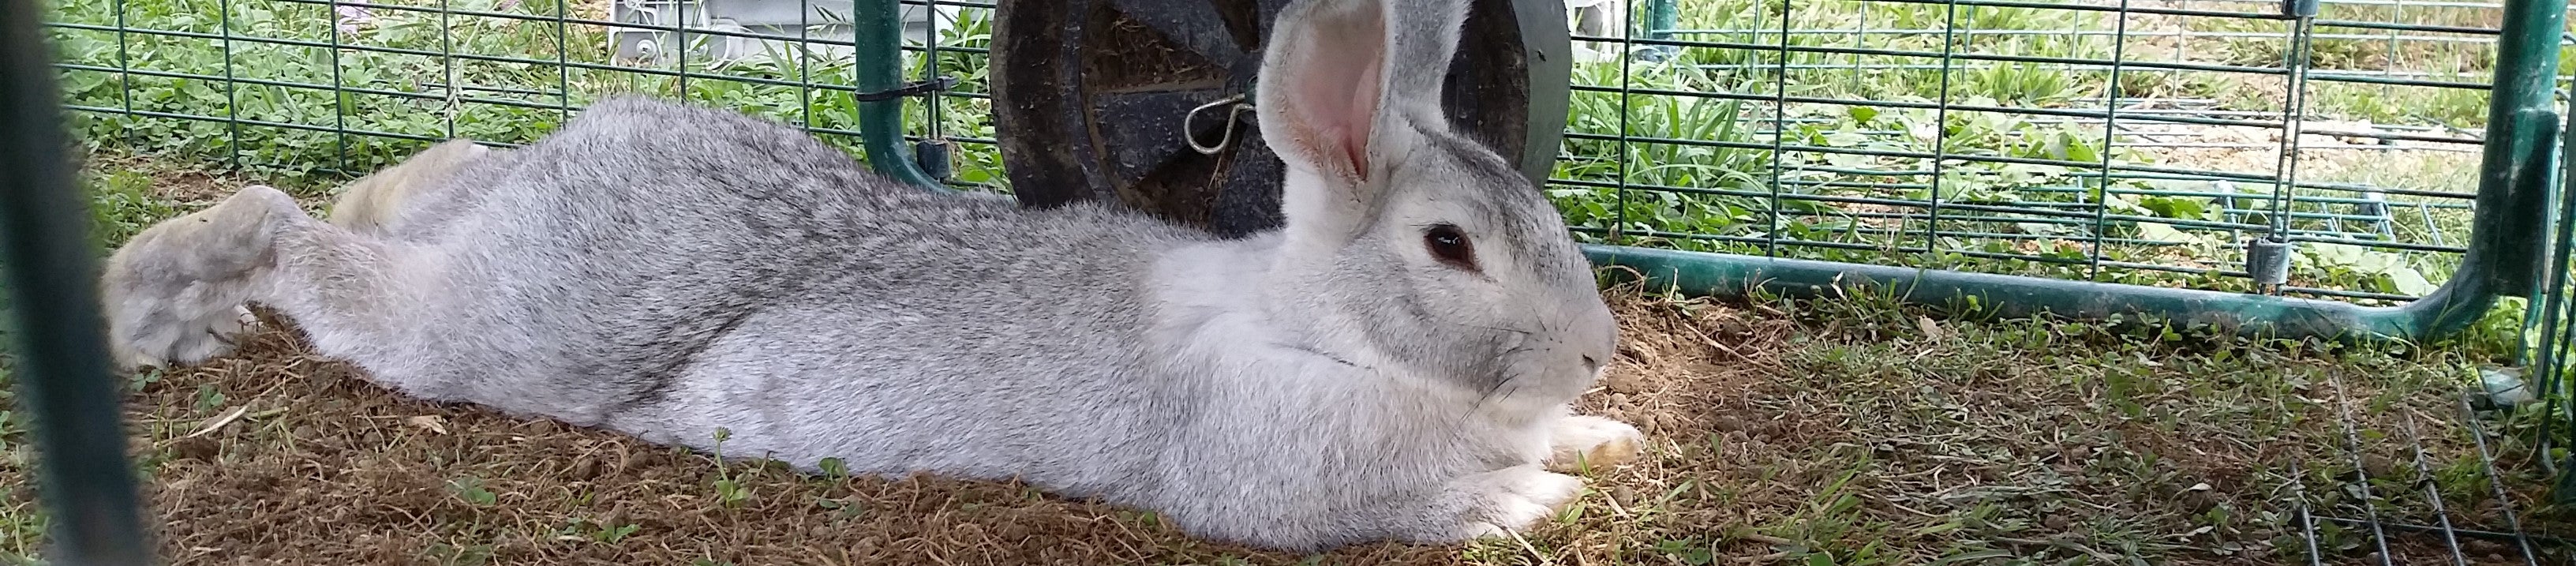 Bugsie, our first indoor/outdoor rabbit. Bugsie is a Light Grey Flemish Giant.